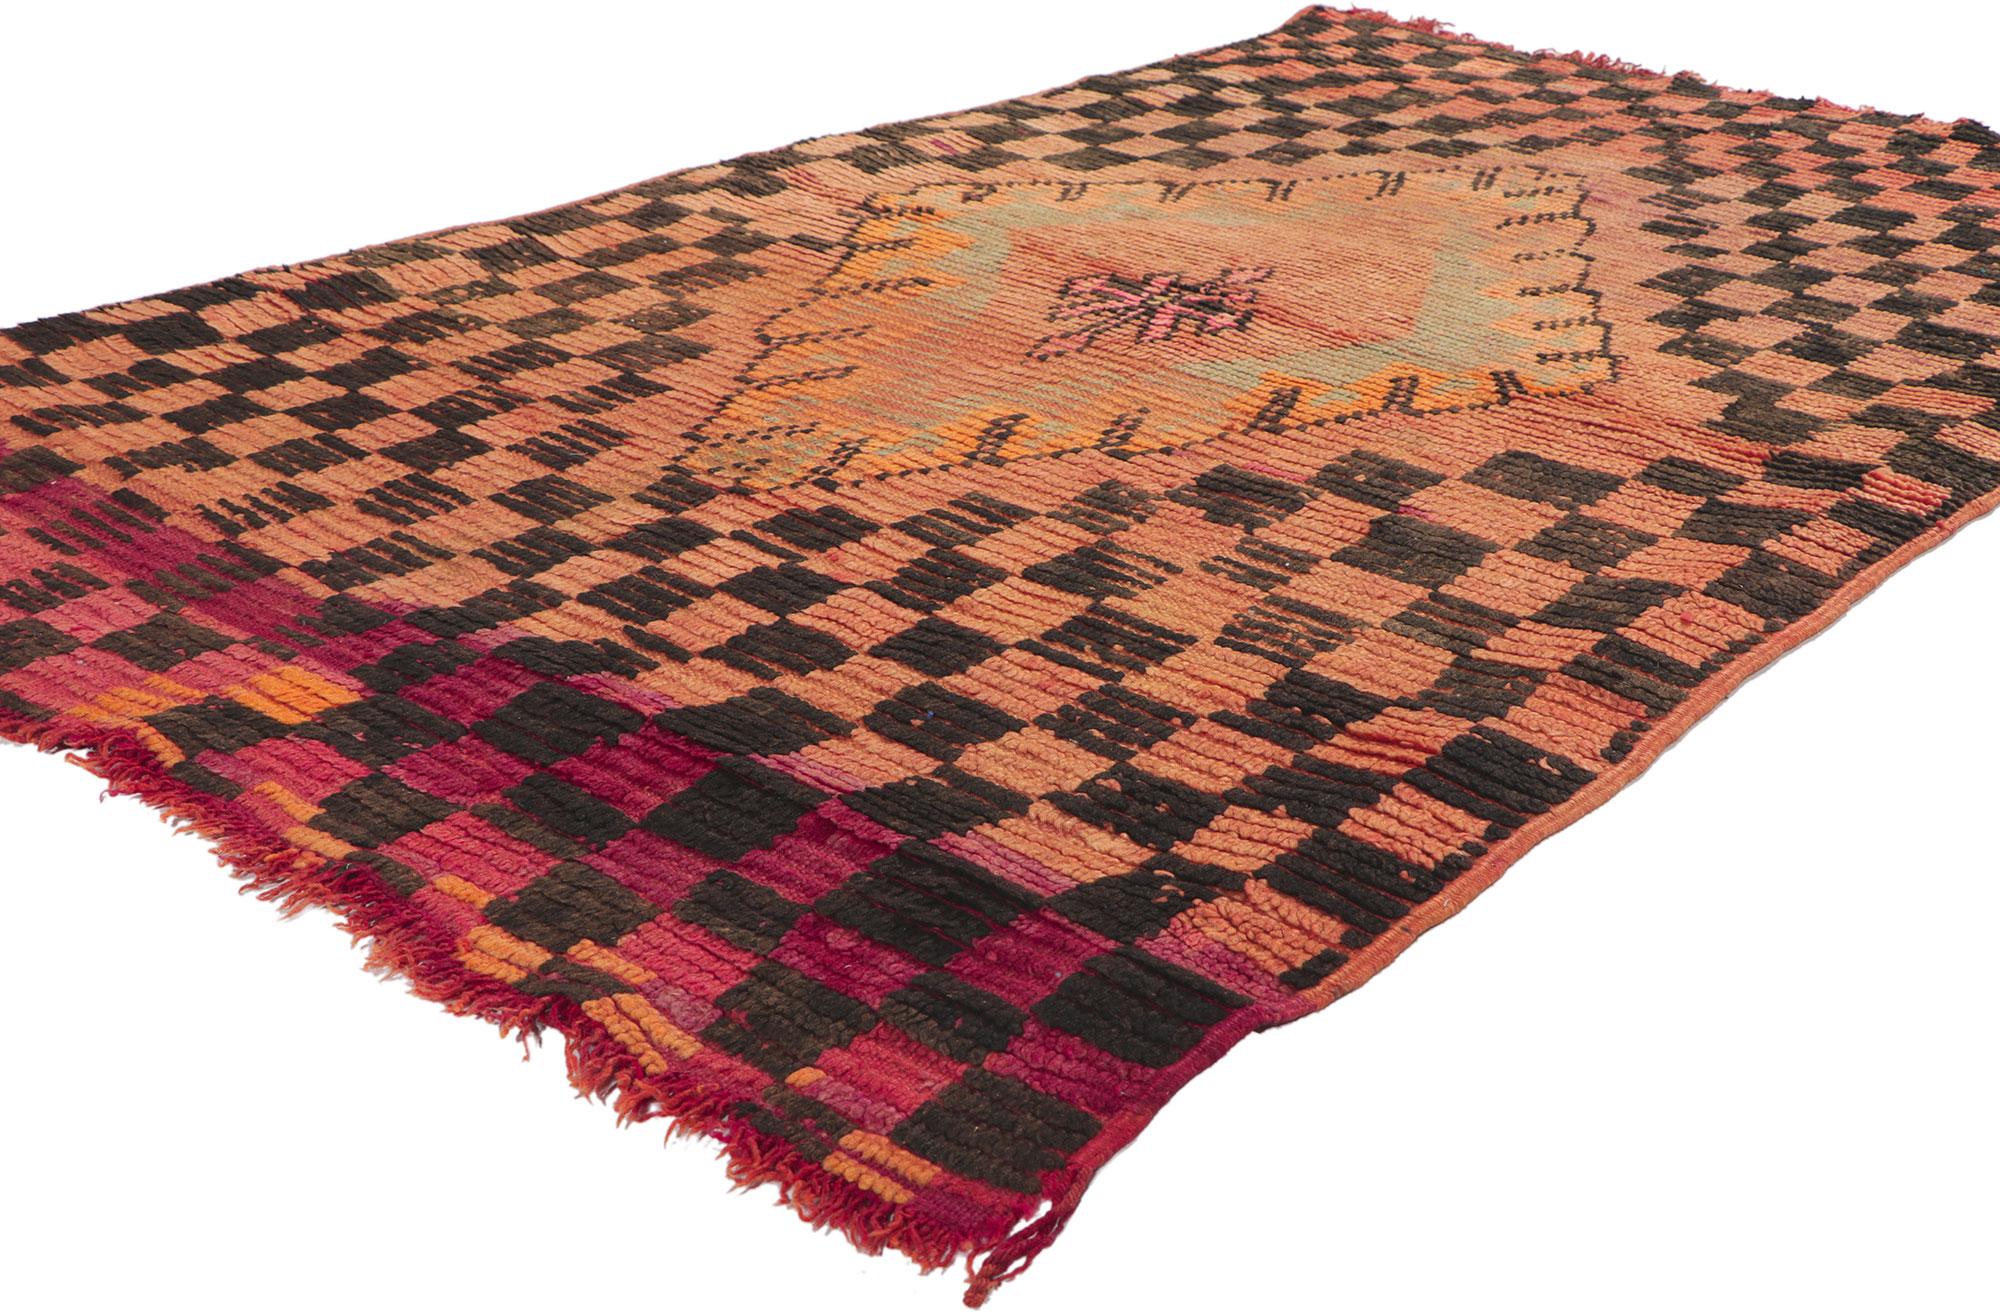 78406 Vintage Orange Boujad Moroccan Rug, 03'08 x 06'00. Boujad rugs, originating from the Boujad region in the Middle Atlas Mountains, are traditional handwoven Moroccan masterpieces crafted by indigenous Berber artisans. Revered for their